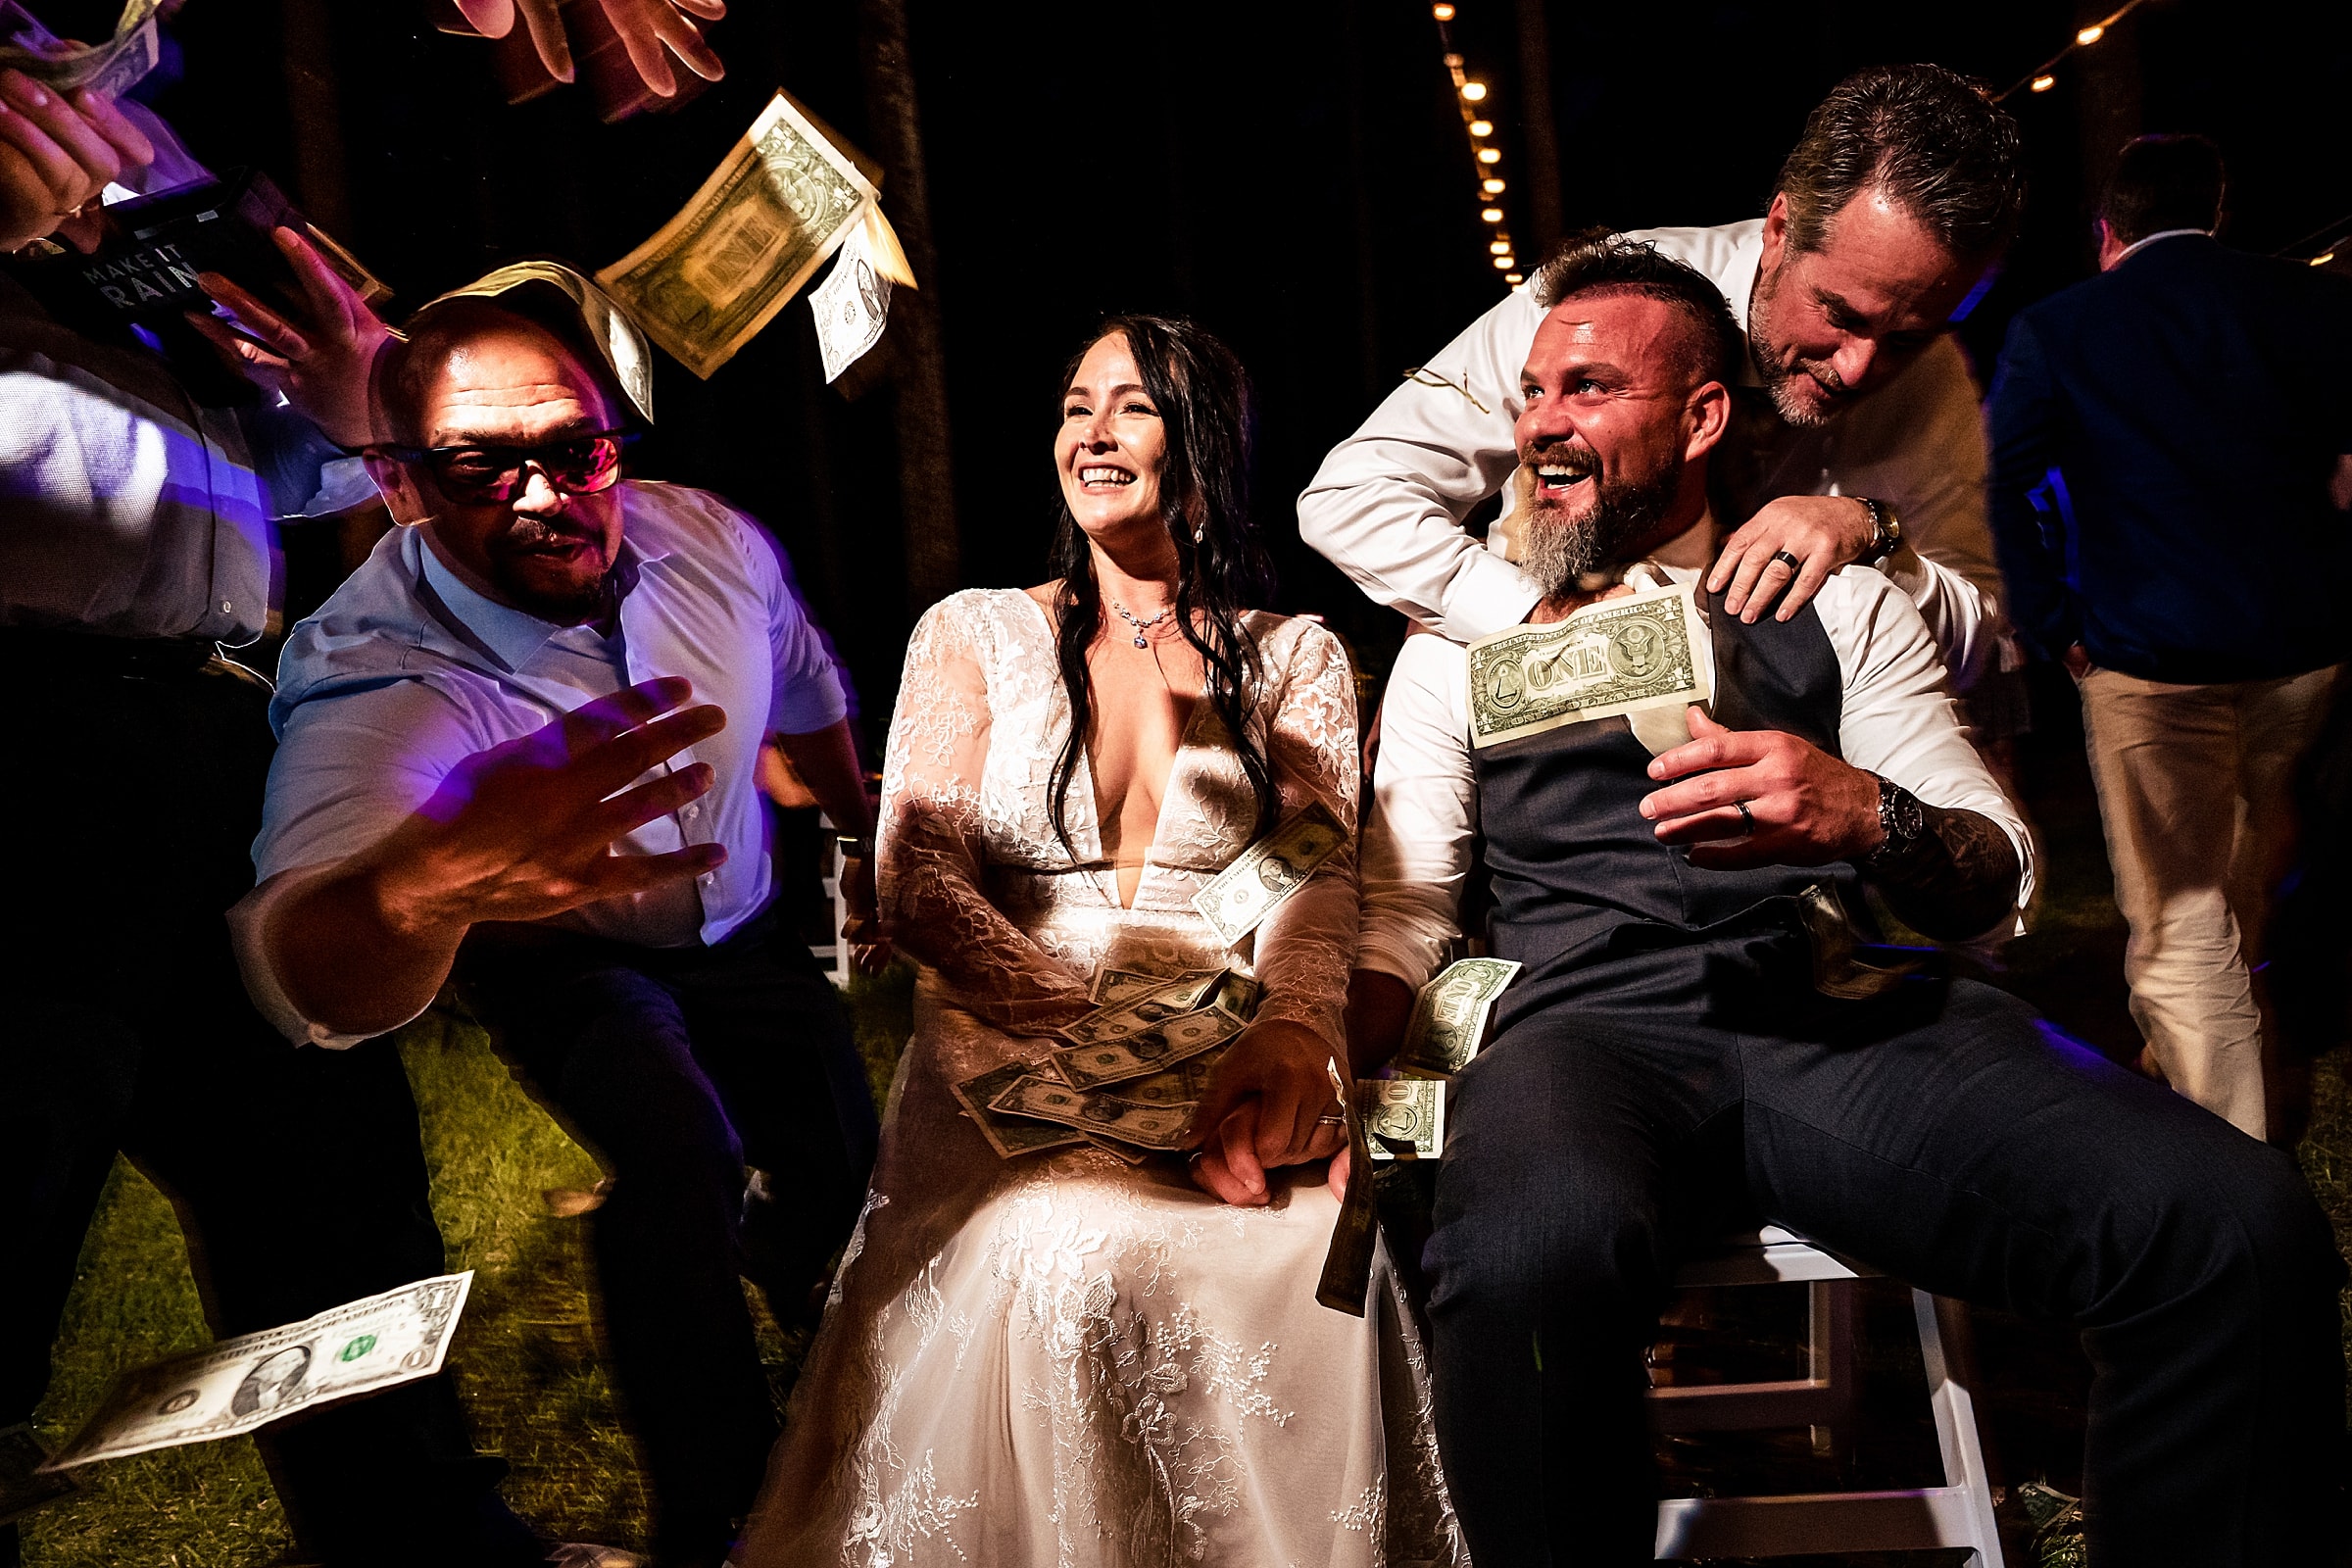 This groom's co-workers surprised the couple by making it rain dollar bills on them